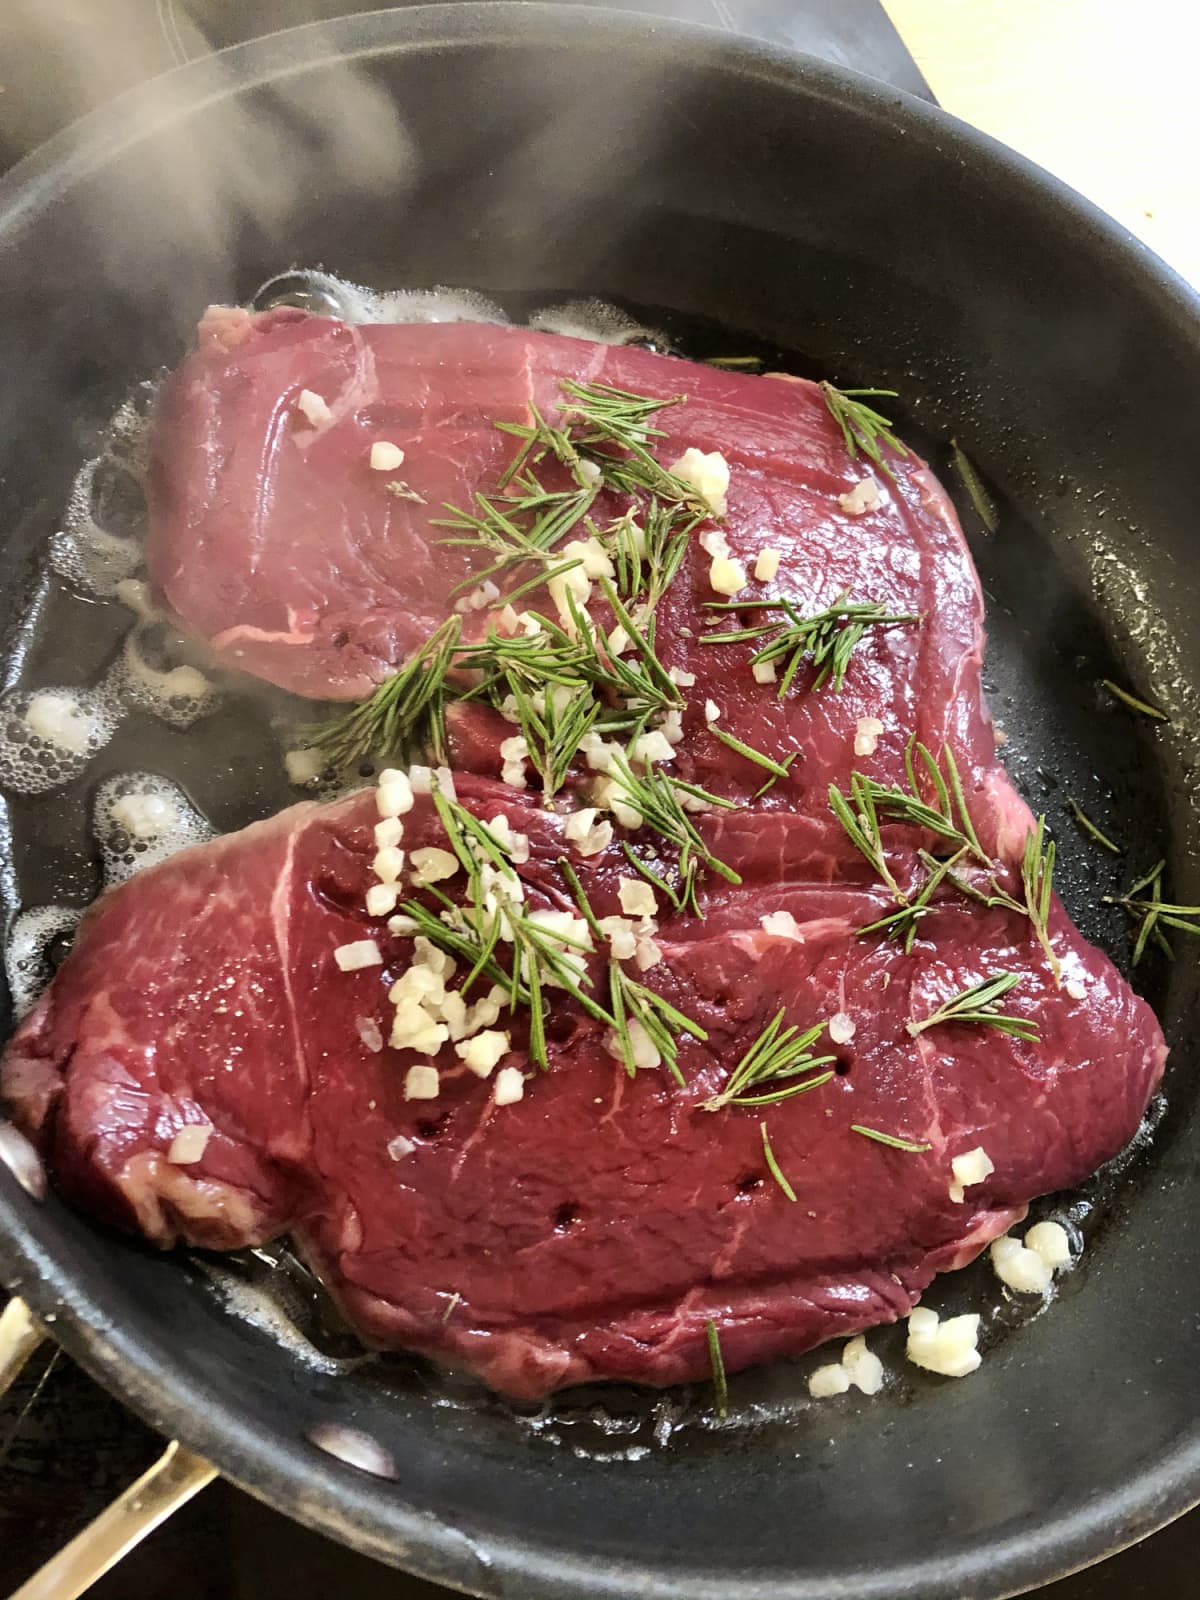 Two pieces of steak cooking in a skillet